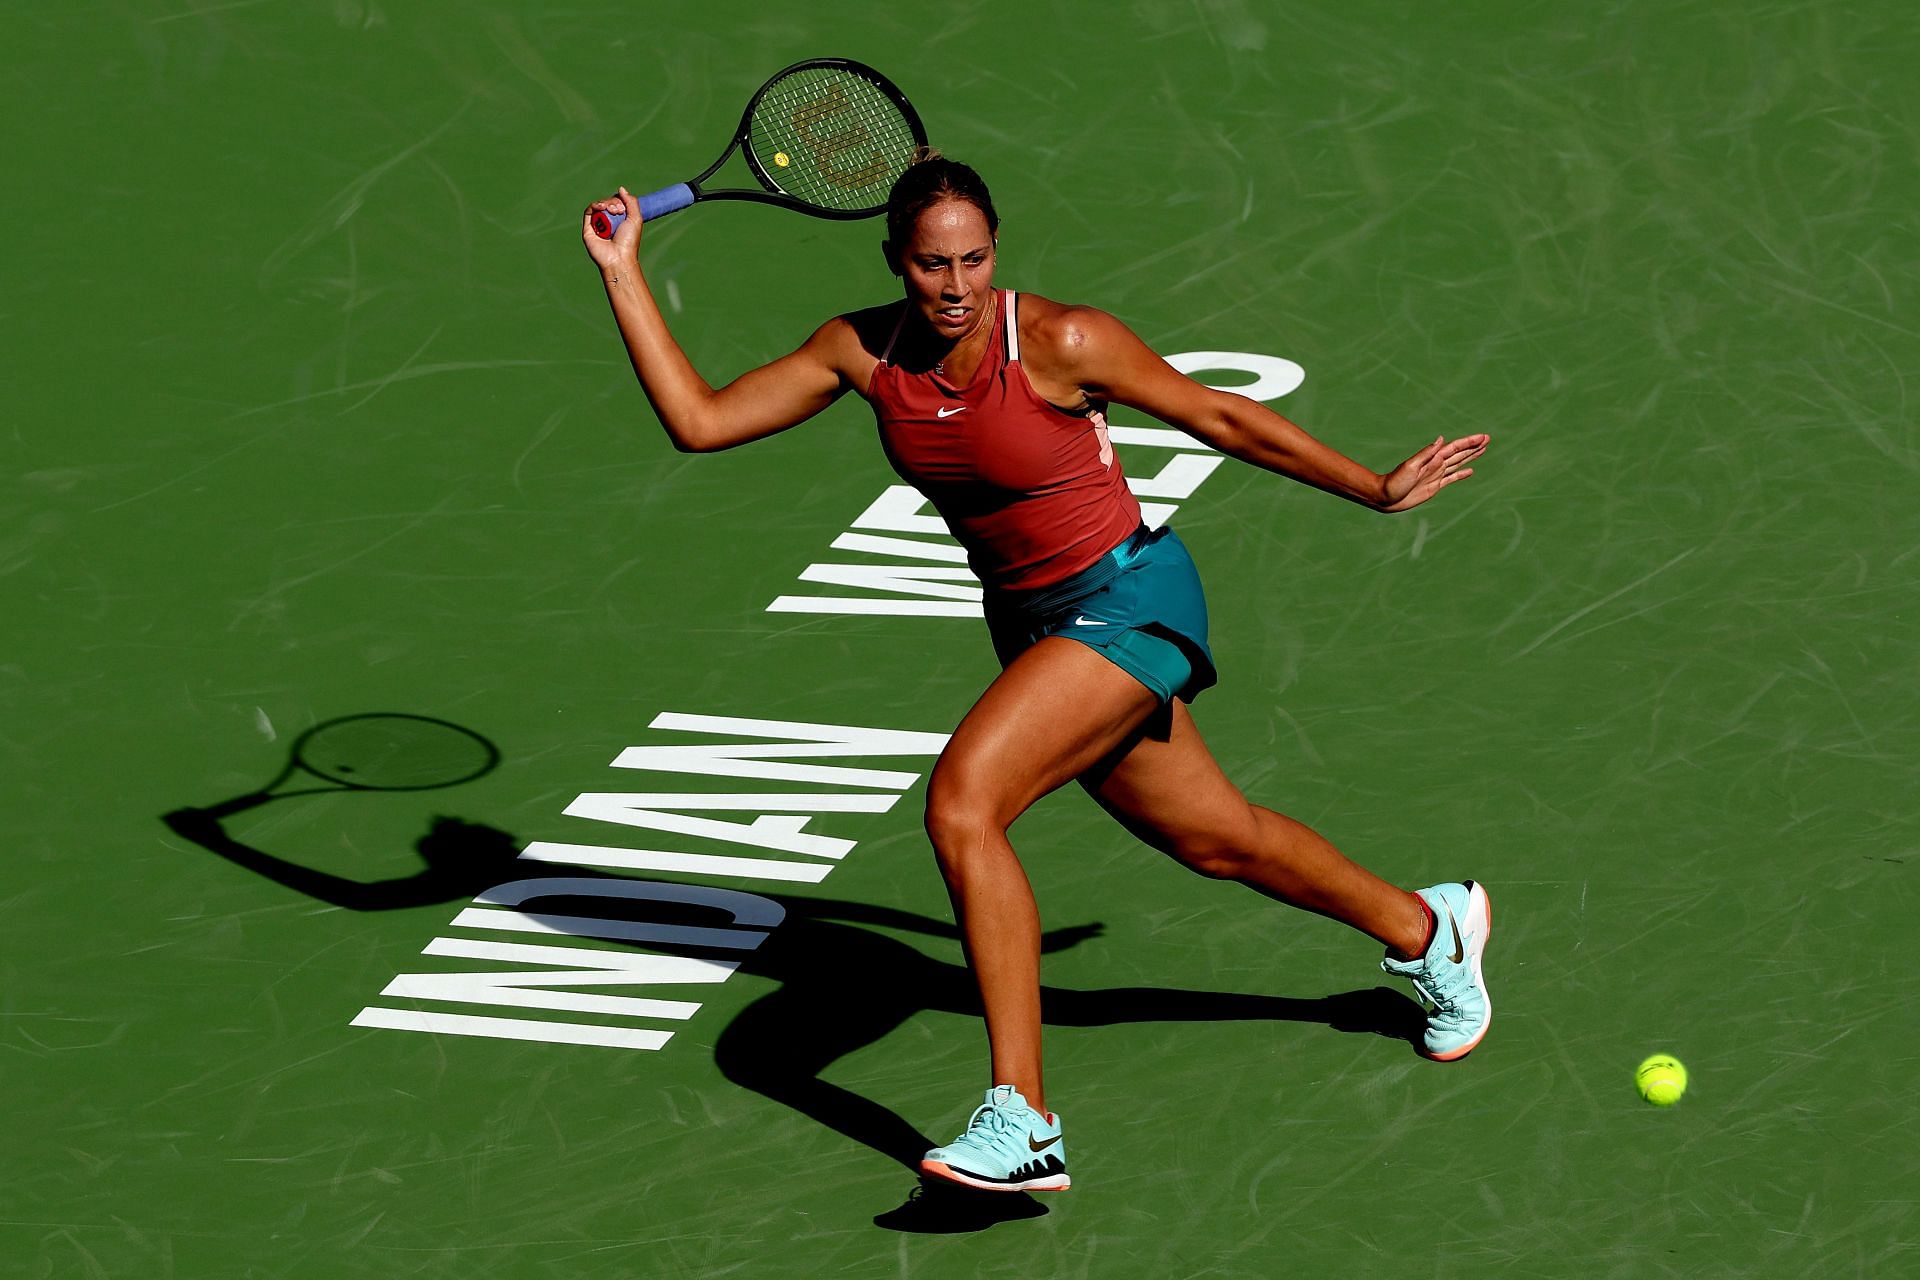 Madison Keys at the 2022 Indian Wells Open.